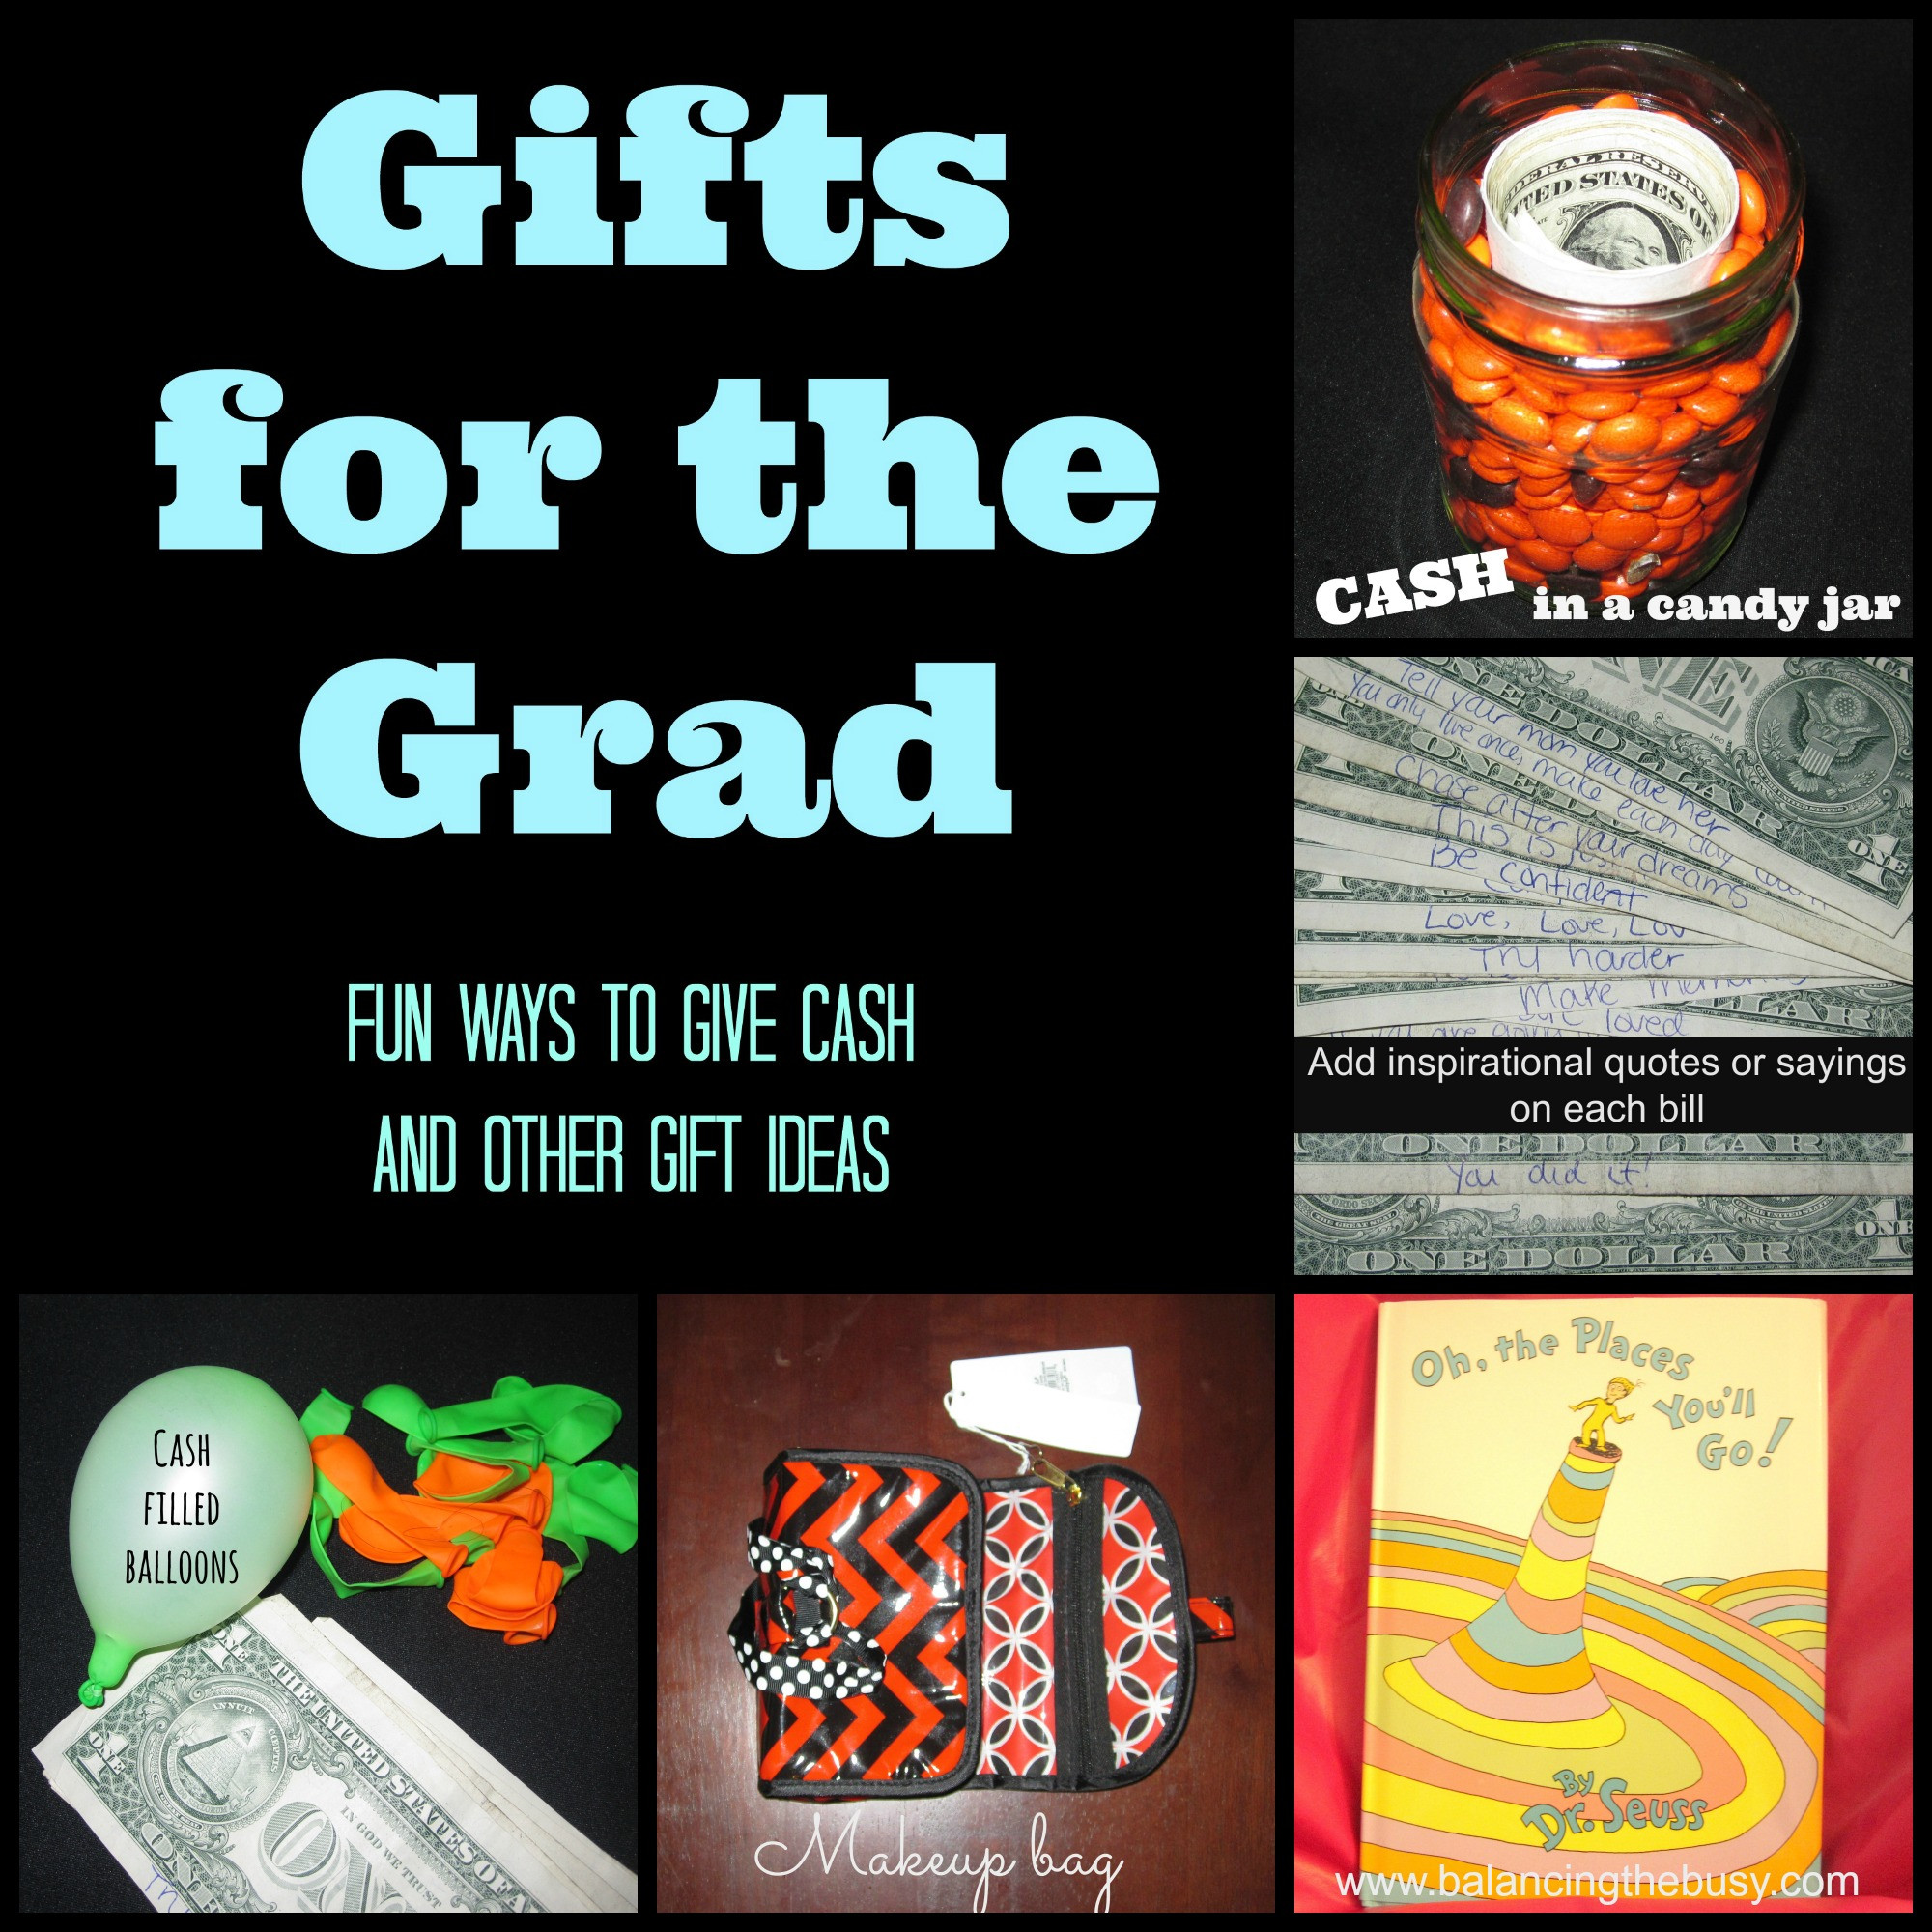 Funny Graduation Gift Ideas
 Gifts for the Grad Fun ways to give cash and other t